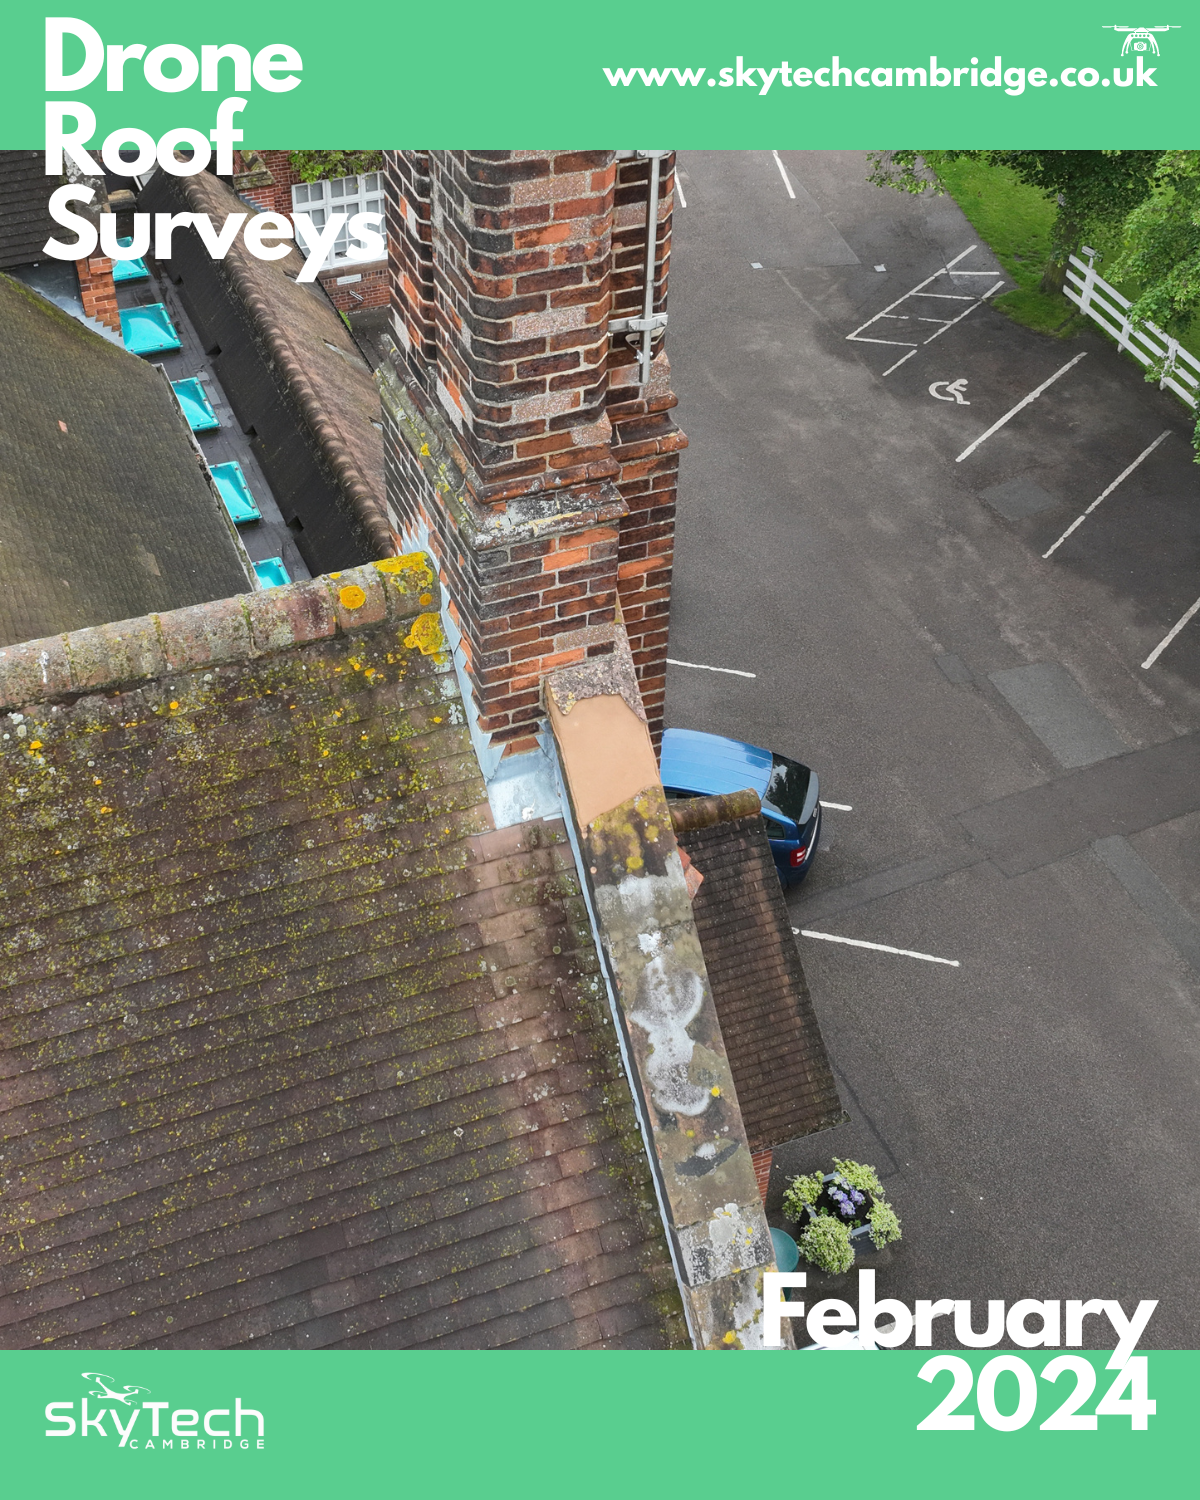 Drone roof survey - aerial photo shows damage and potential safety concern of additional falling debris